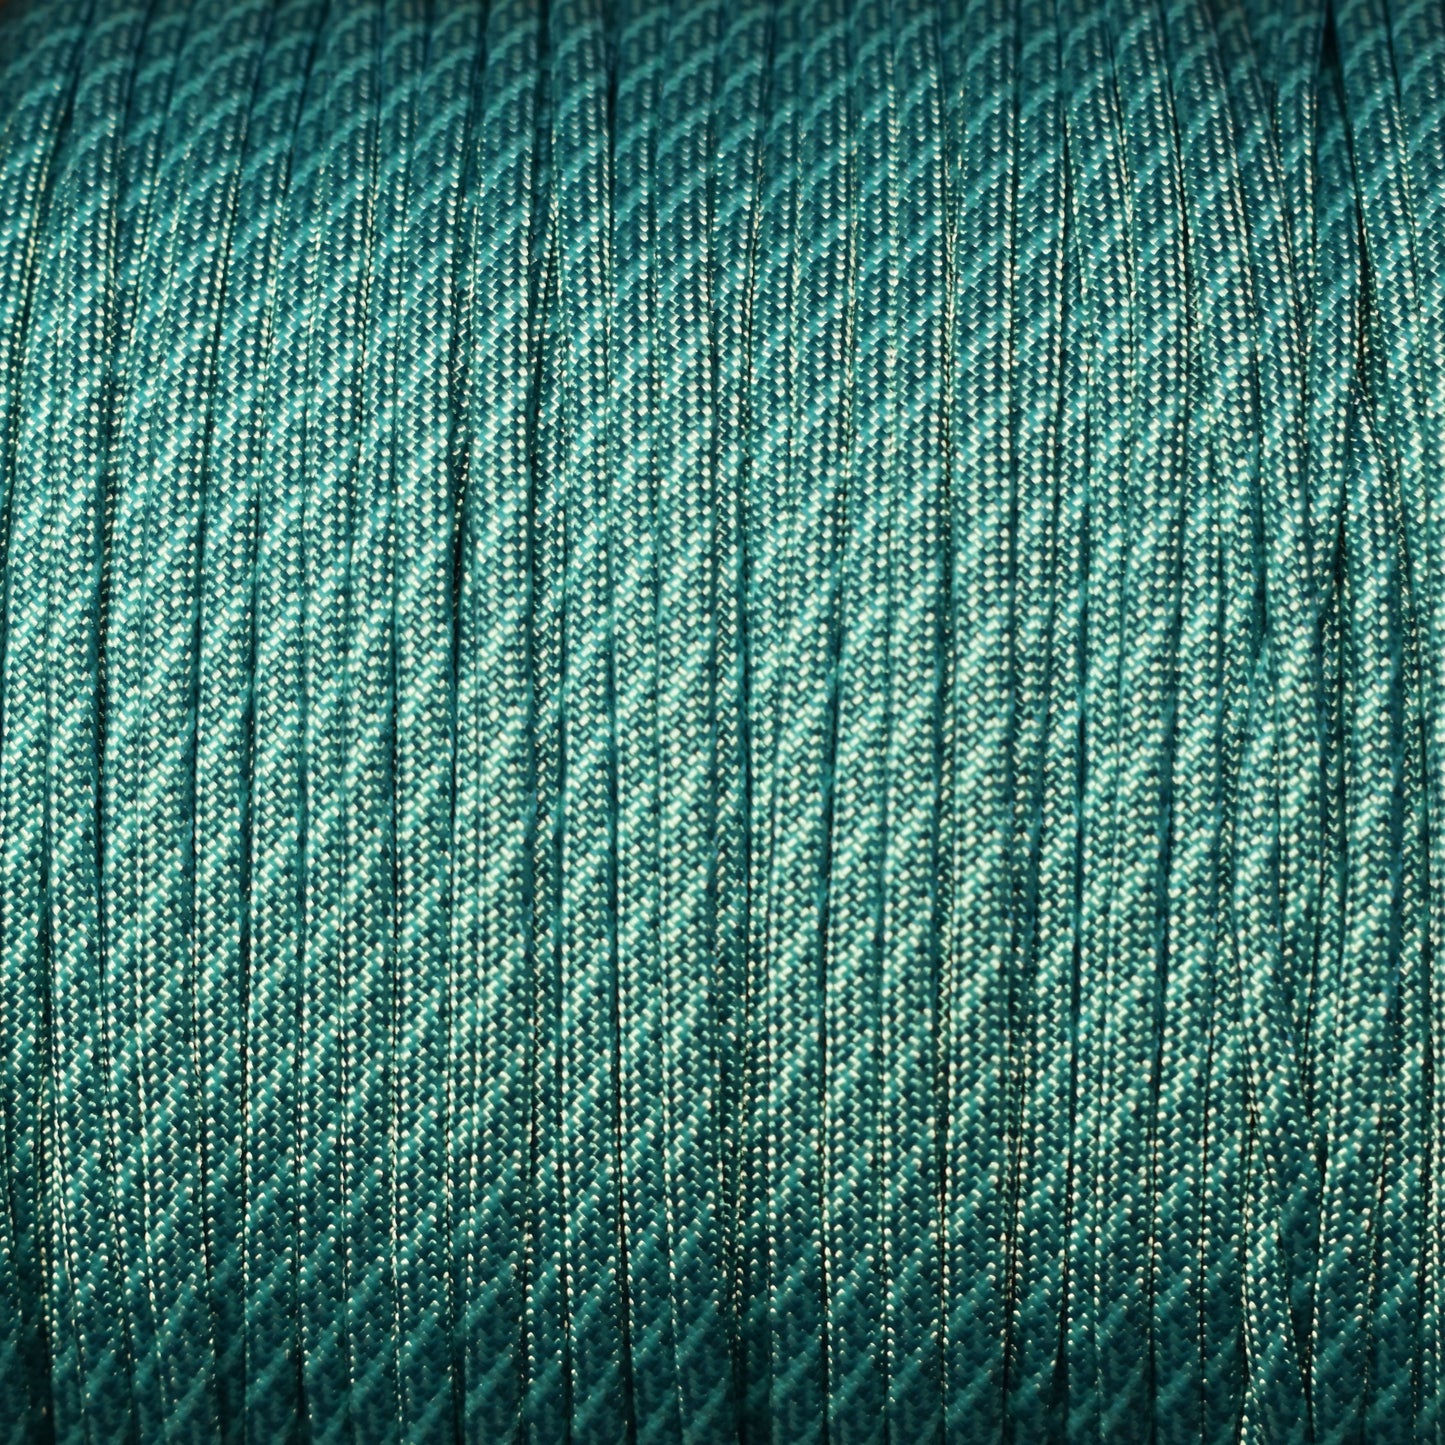 550 Paracord Teal with Turquoise Helix Made in the USA Nylon/Nylon (1000 FT.)